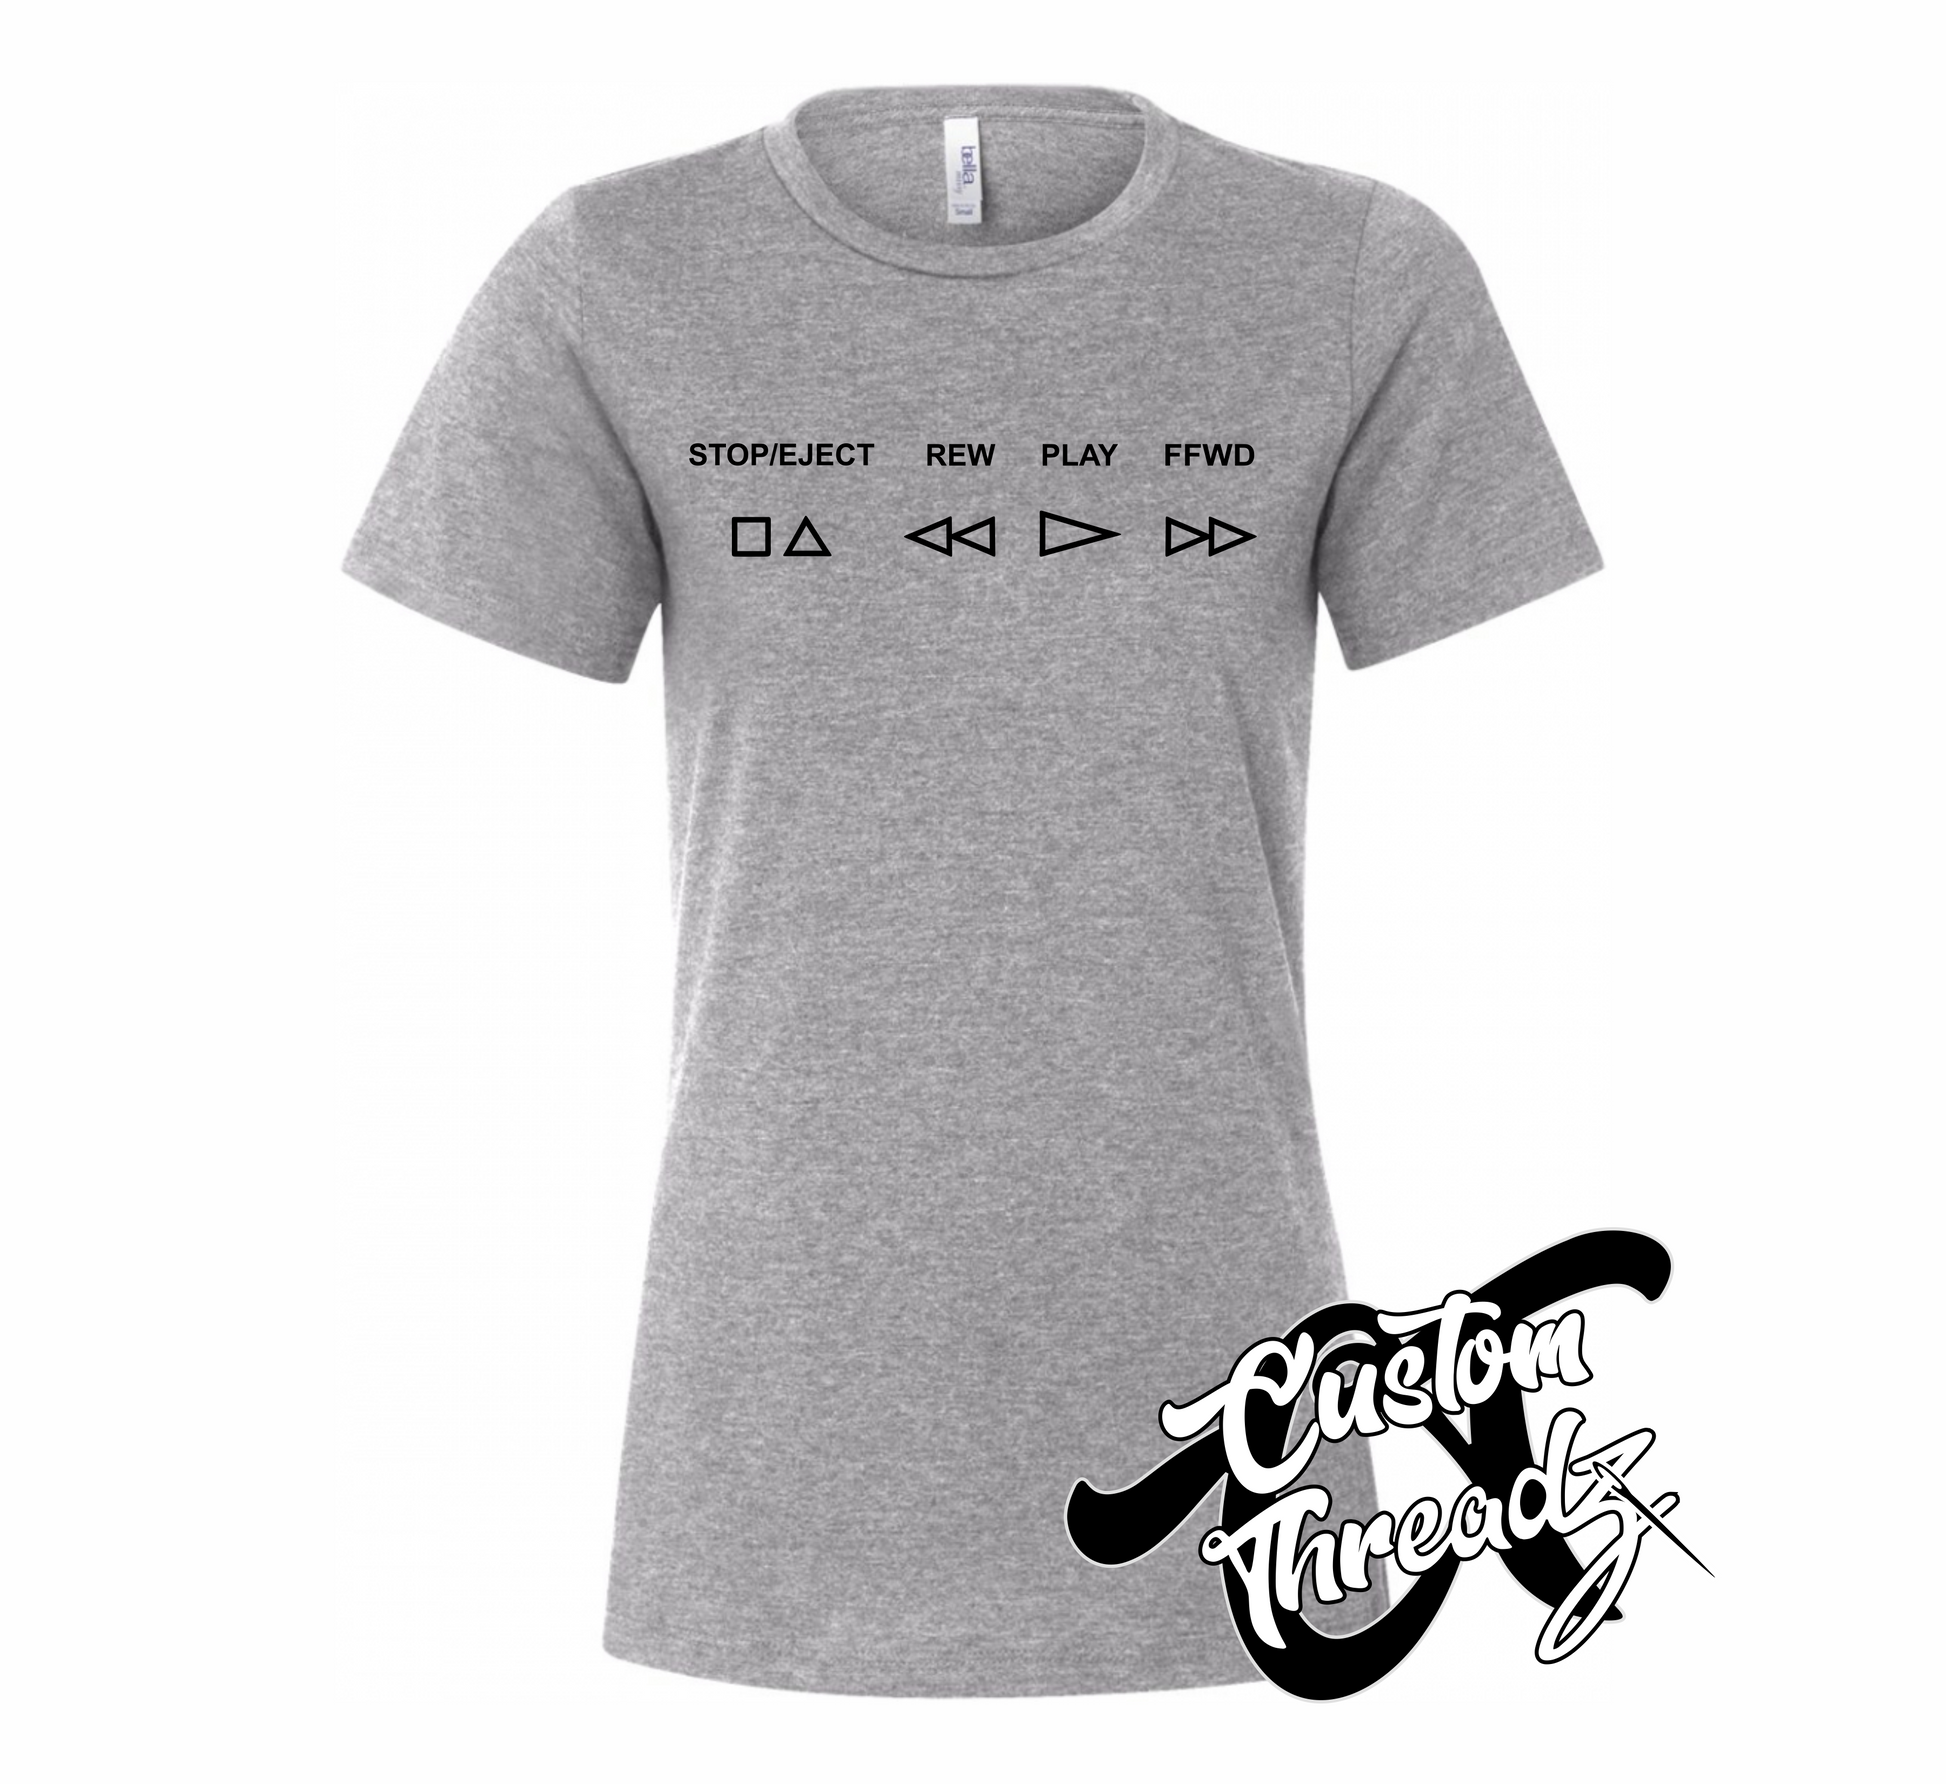 athletic heather grey womens tee with VCR button stop eject rew play ffwd DTG printed design